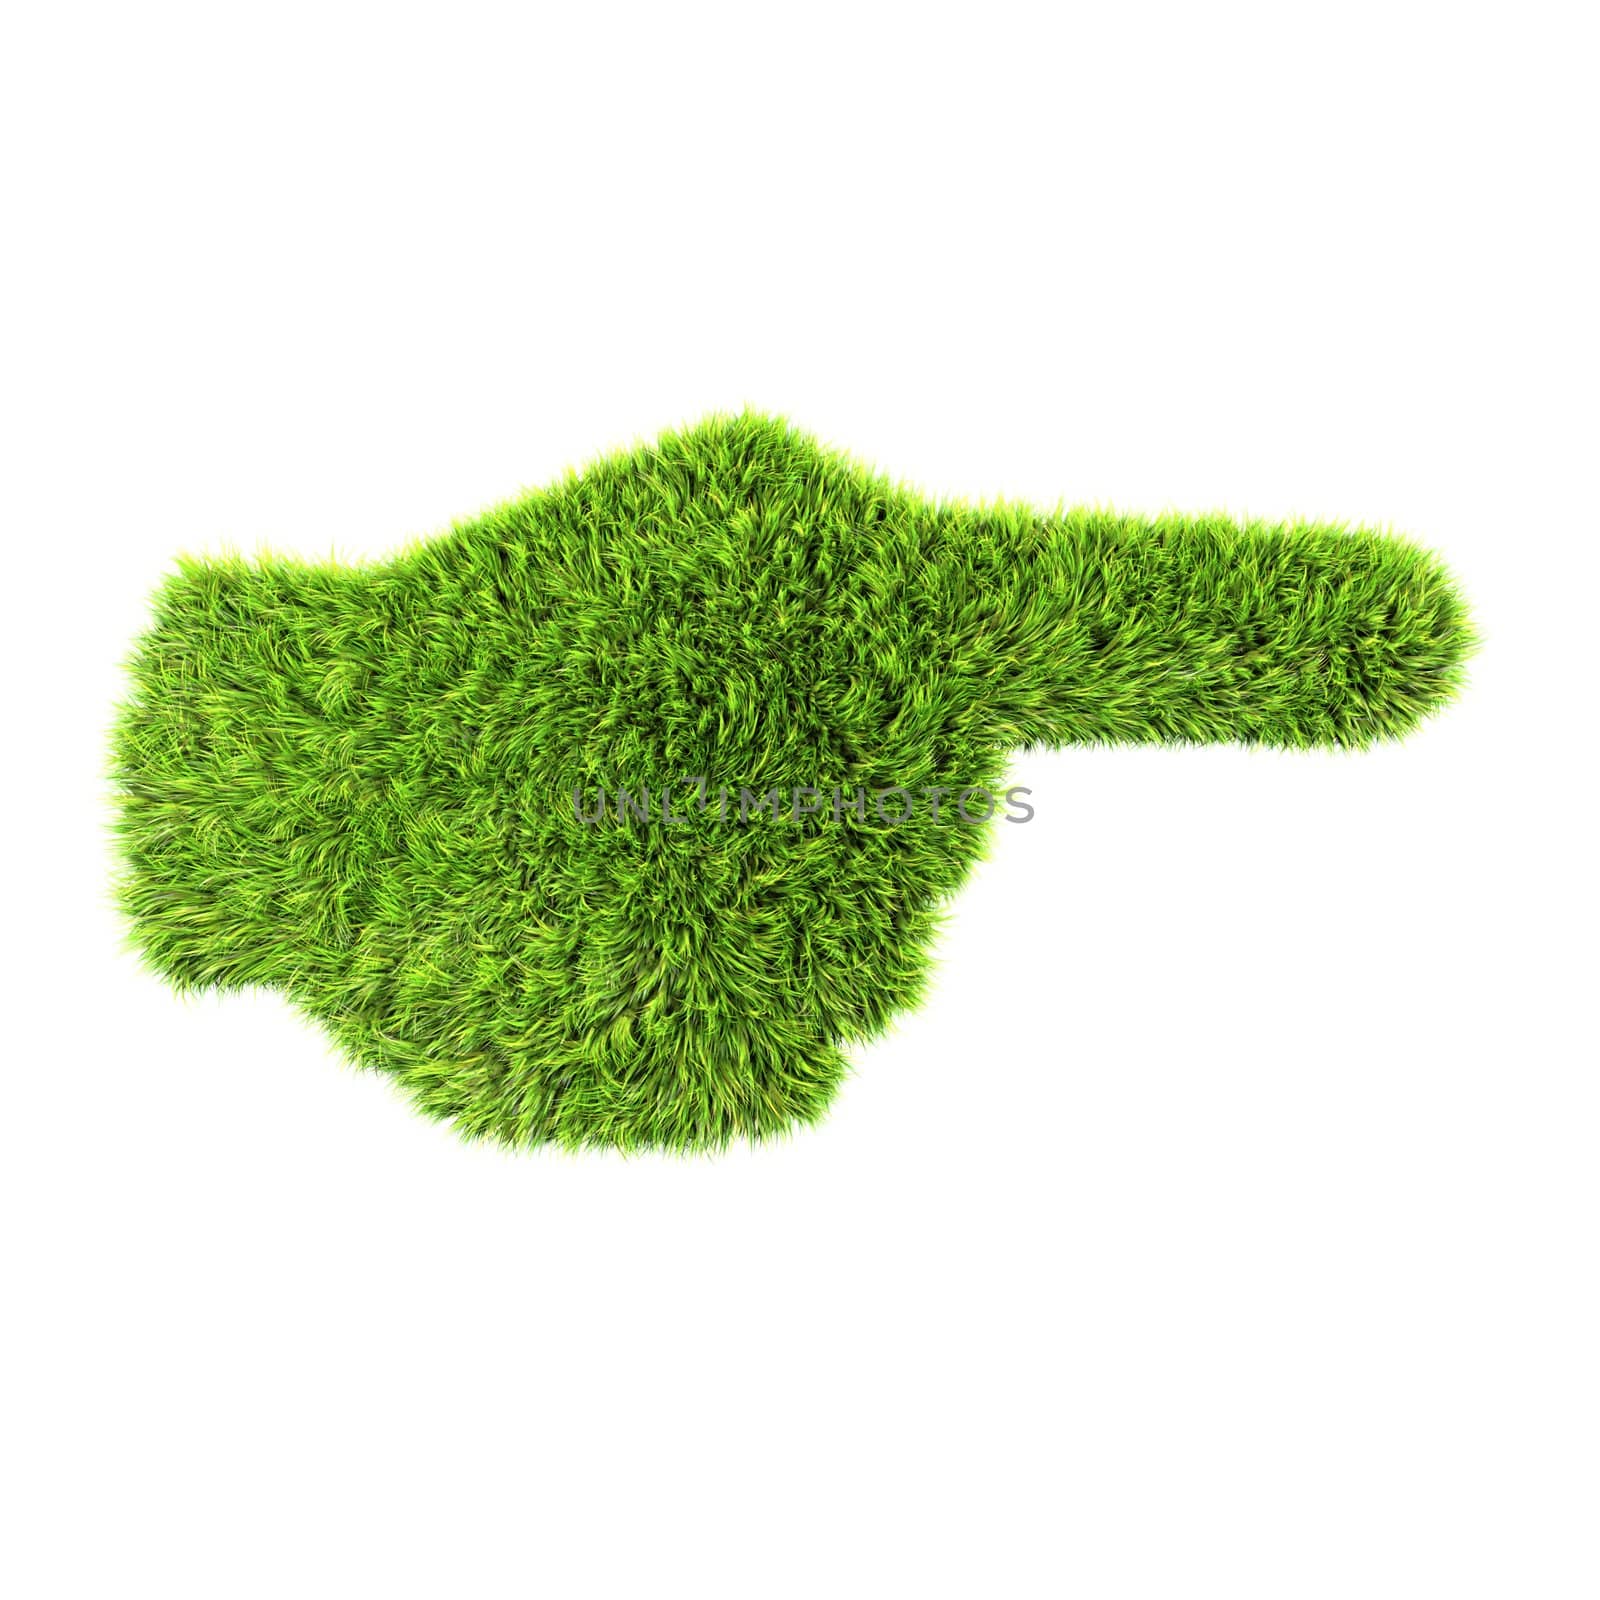 3d grass hand sign isolated on a white background by chrisroll